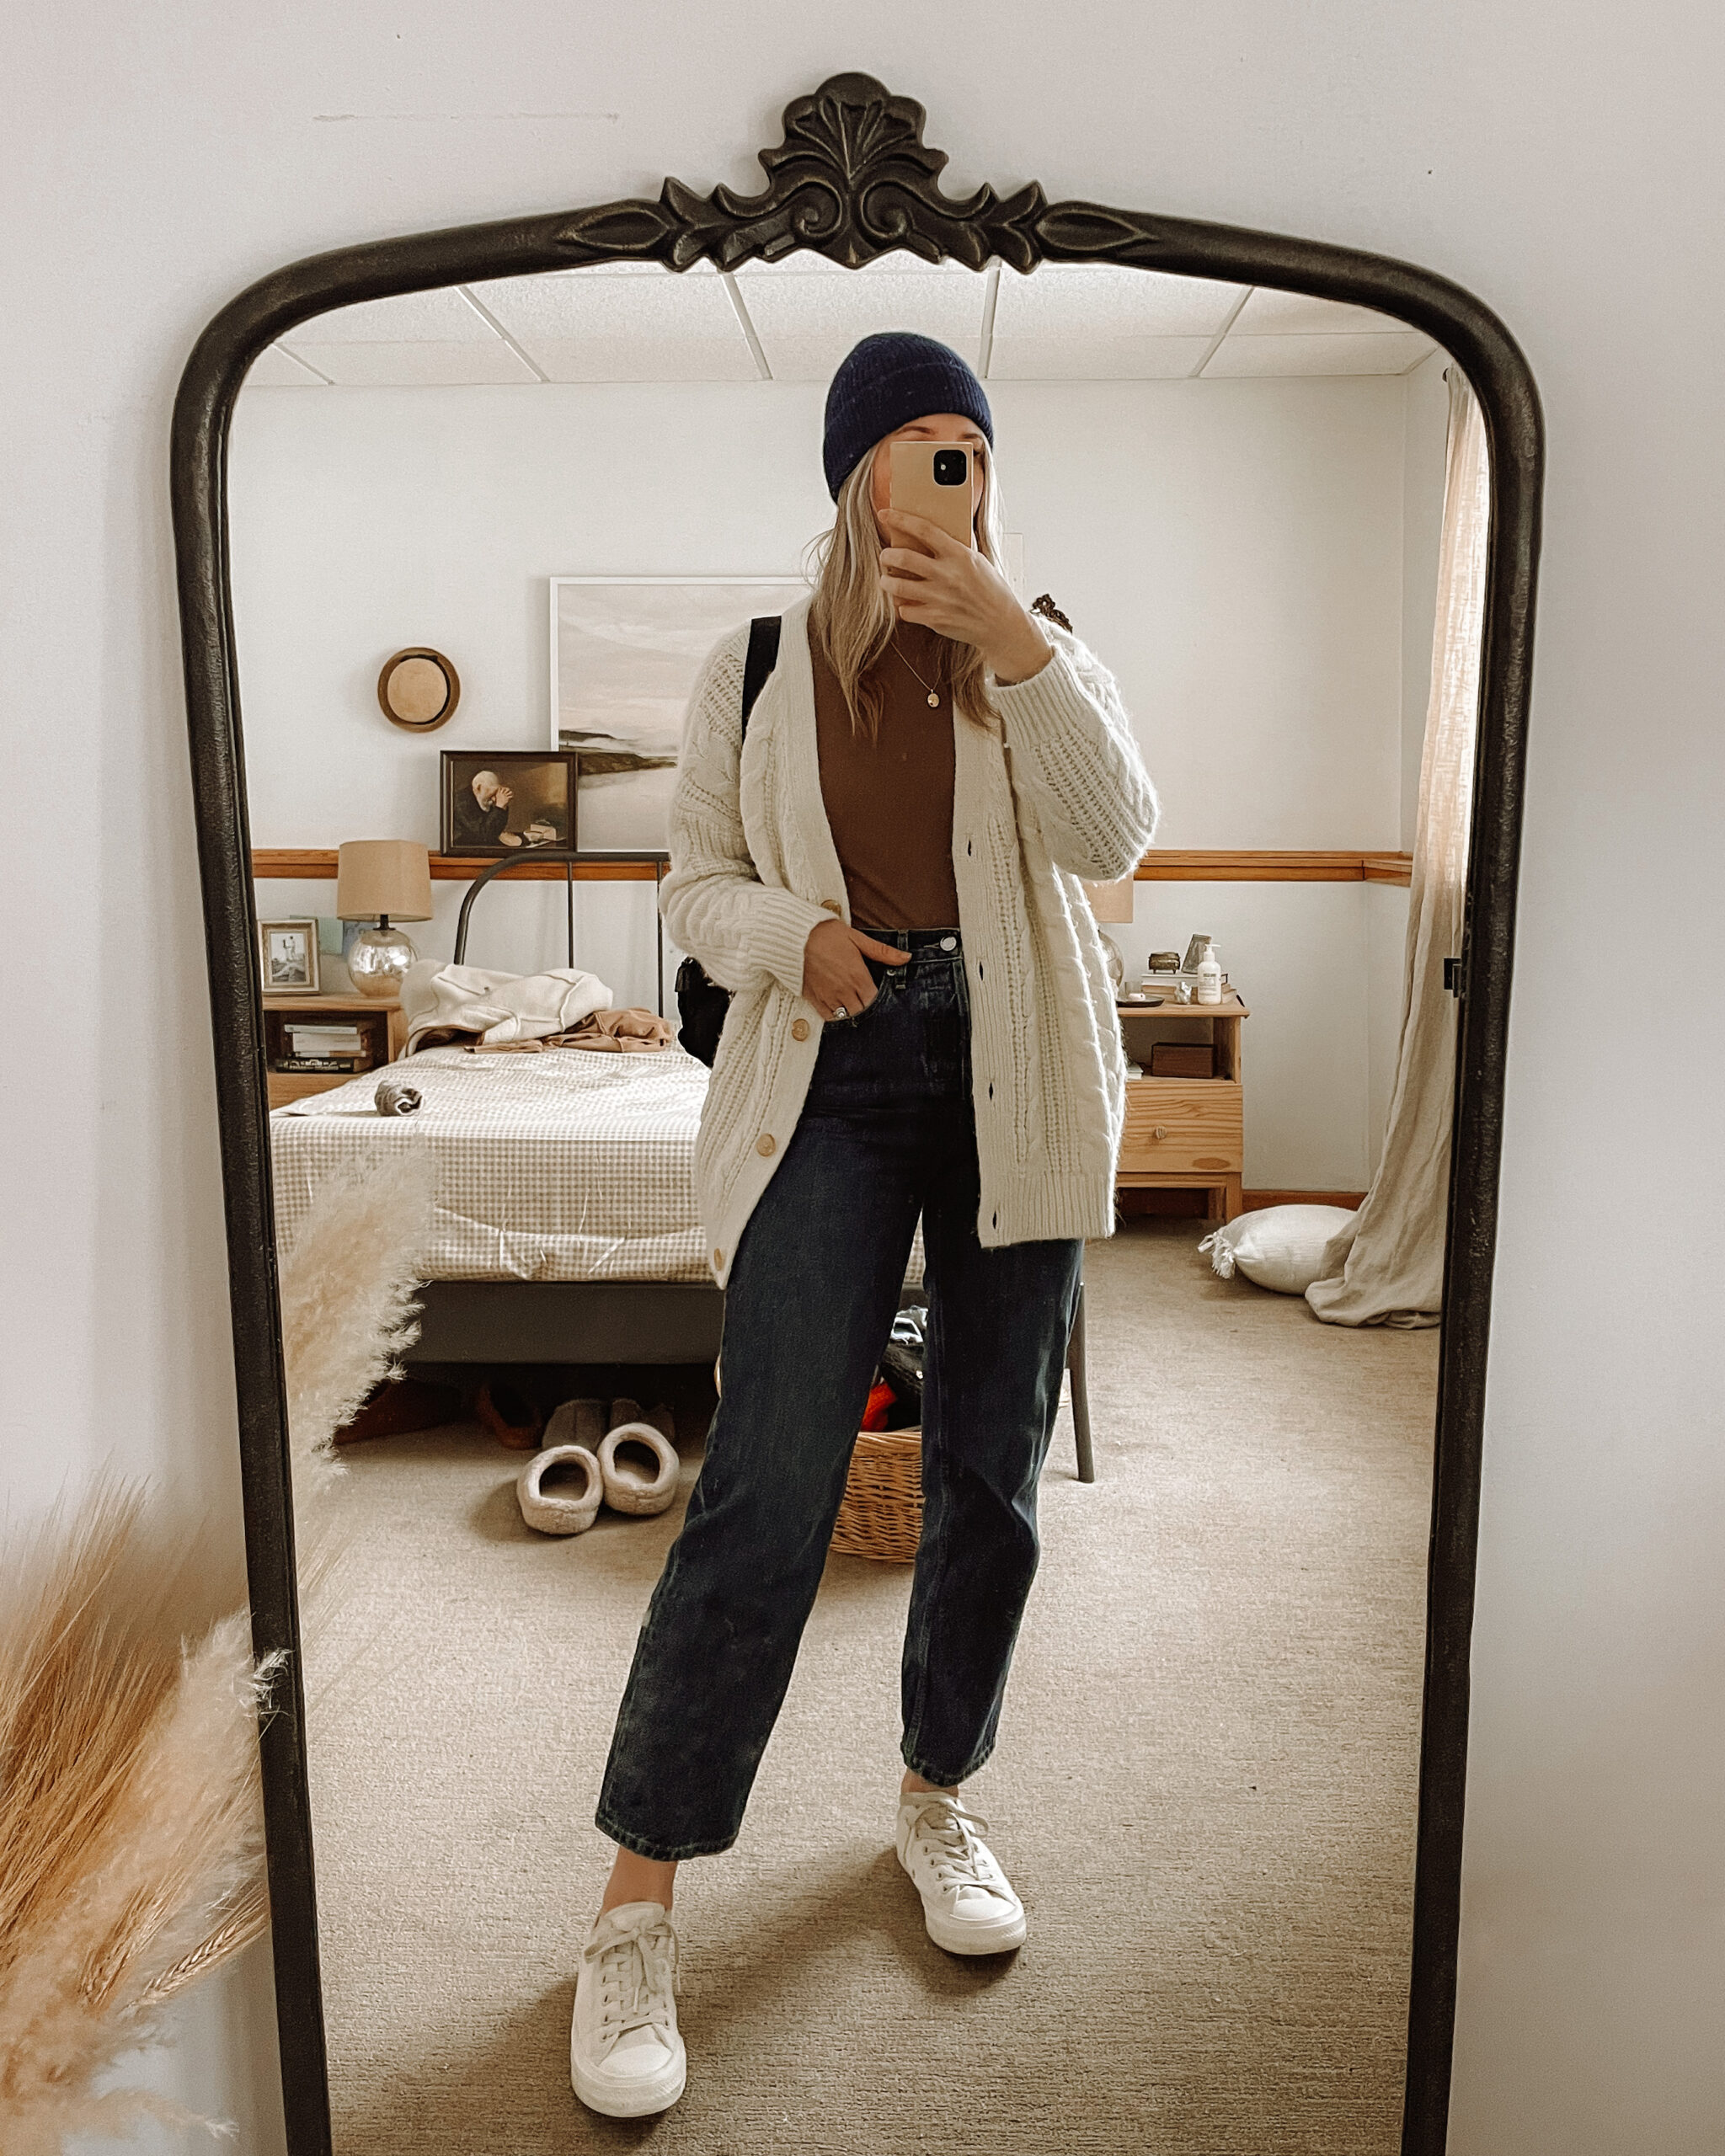 Karin Emily wears a dark wash pair of way high jeans from Everlane, a Madewell bodysuit, jenni Kayne cable knit cardigan, and converse sneakers